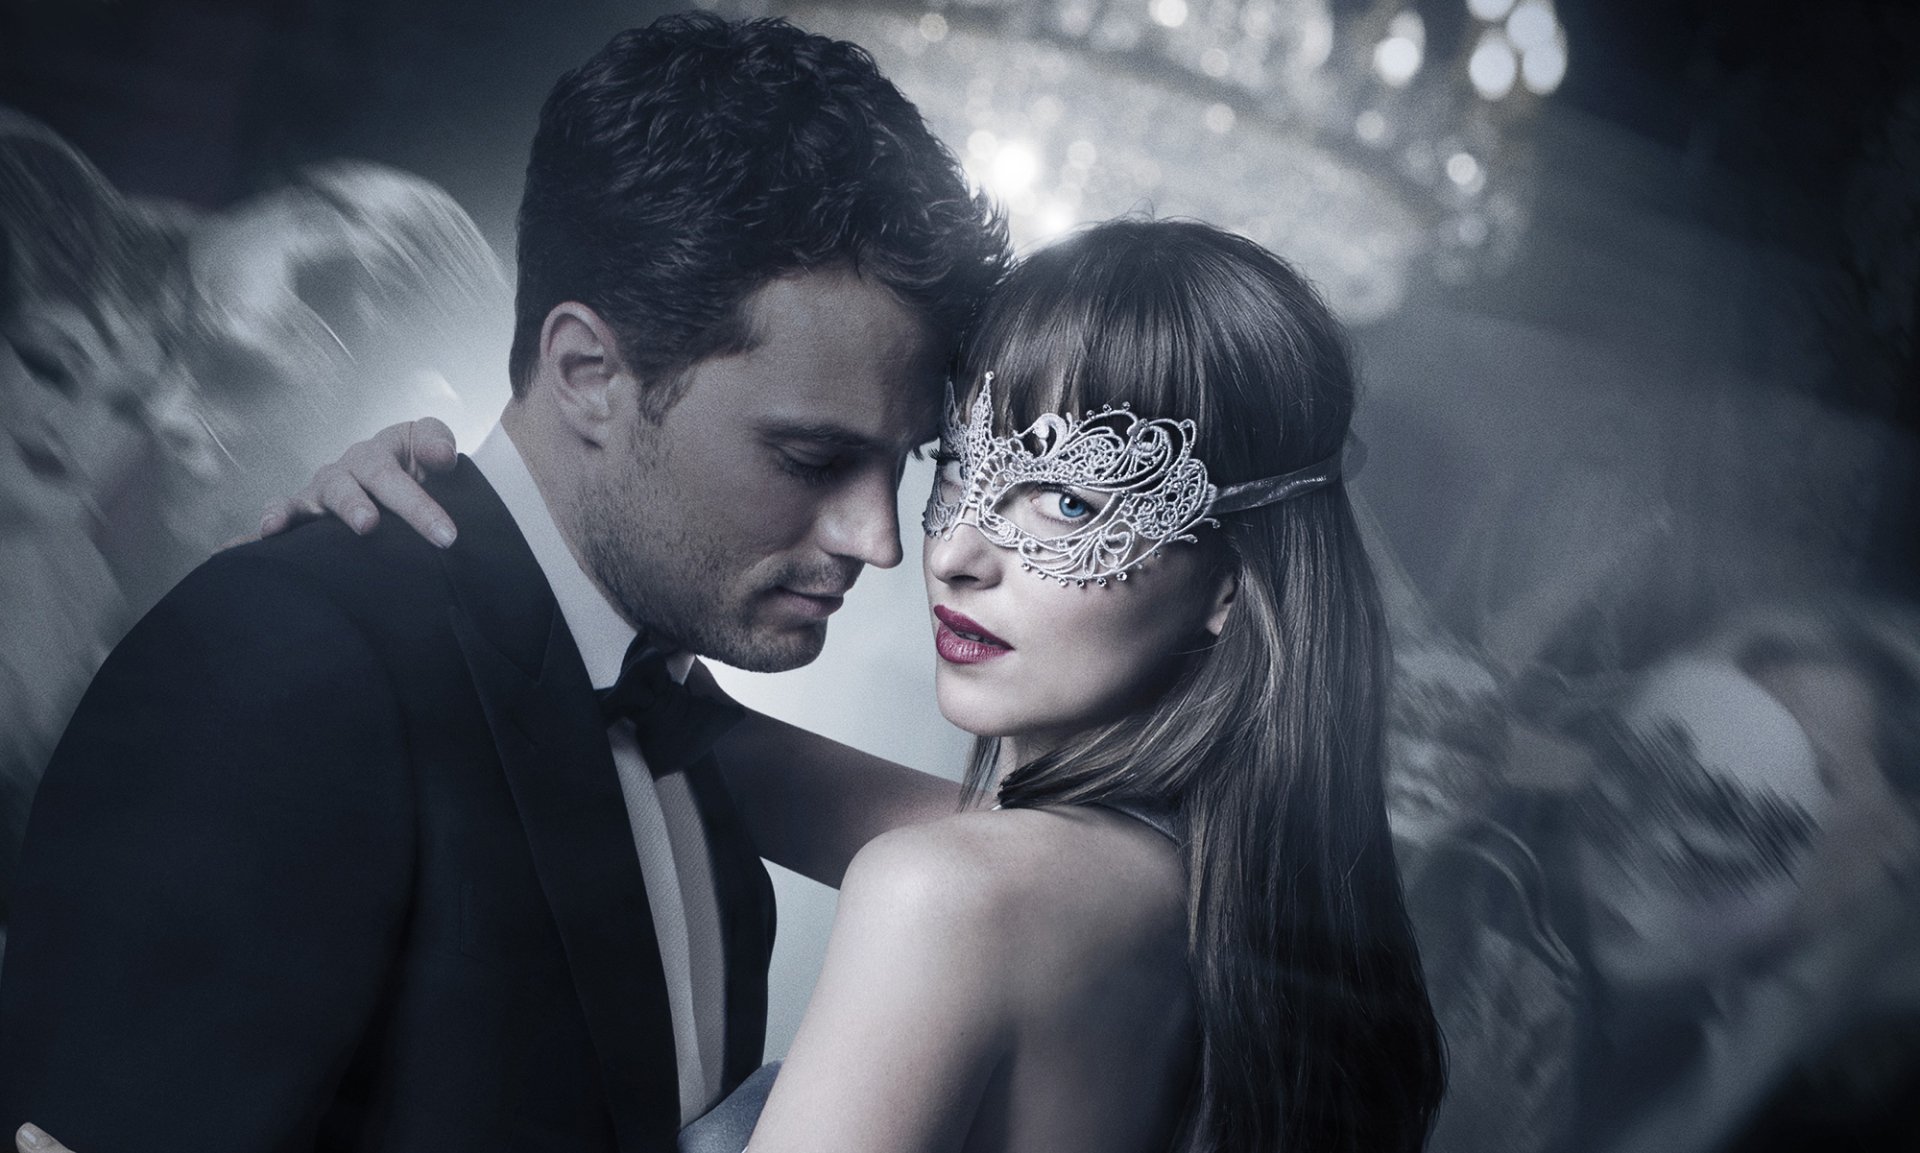 fifty shades freed full hd 1080p movie download free